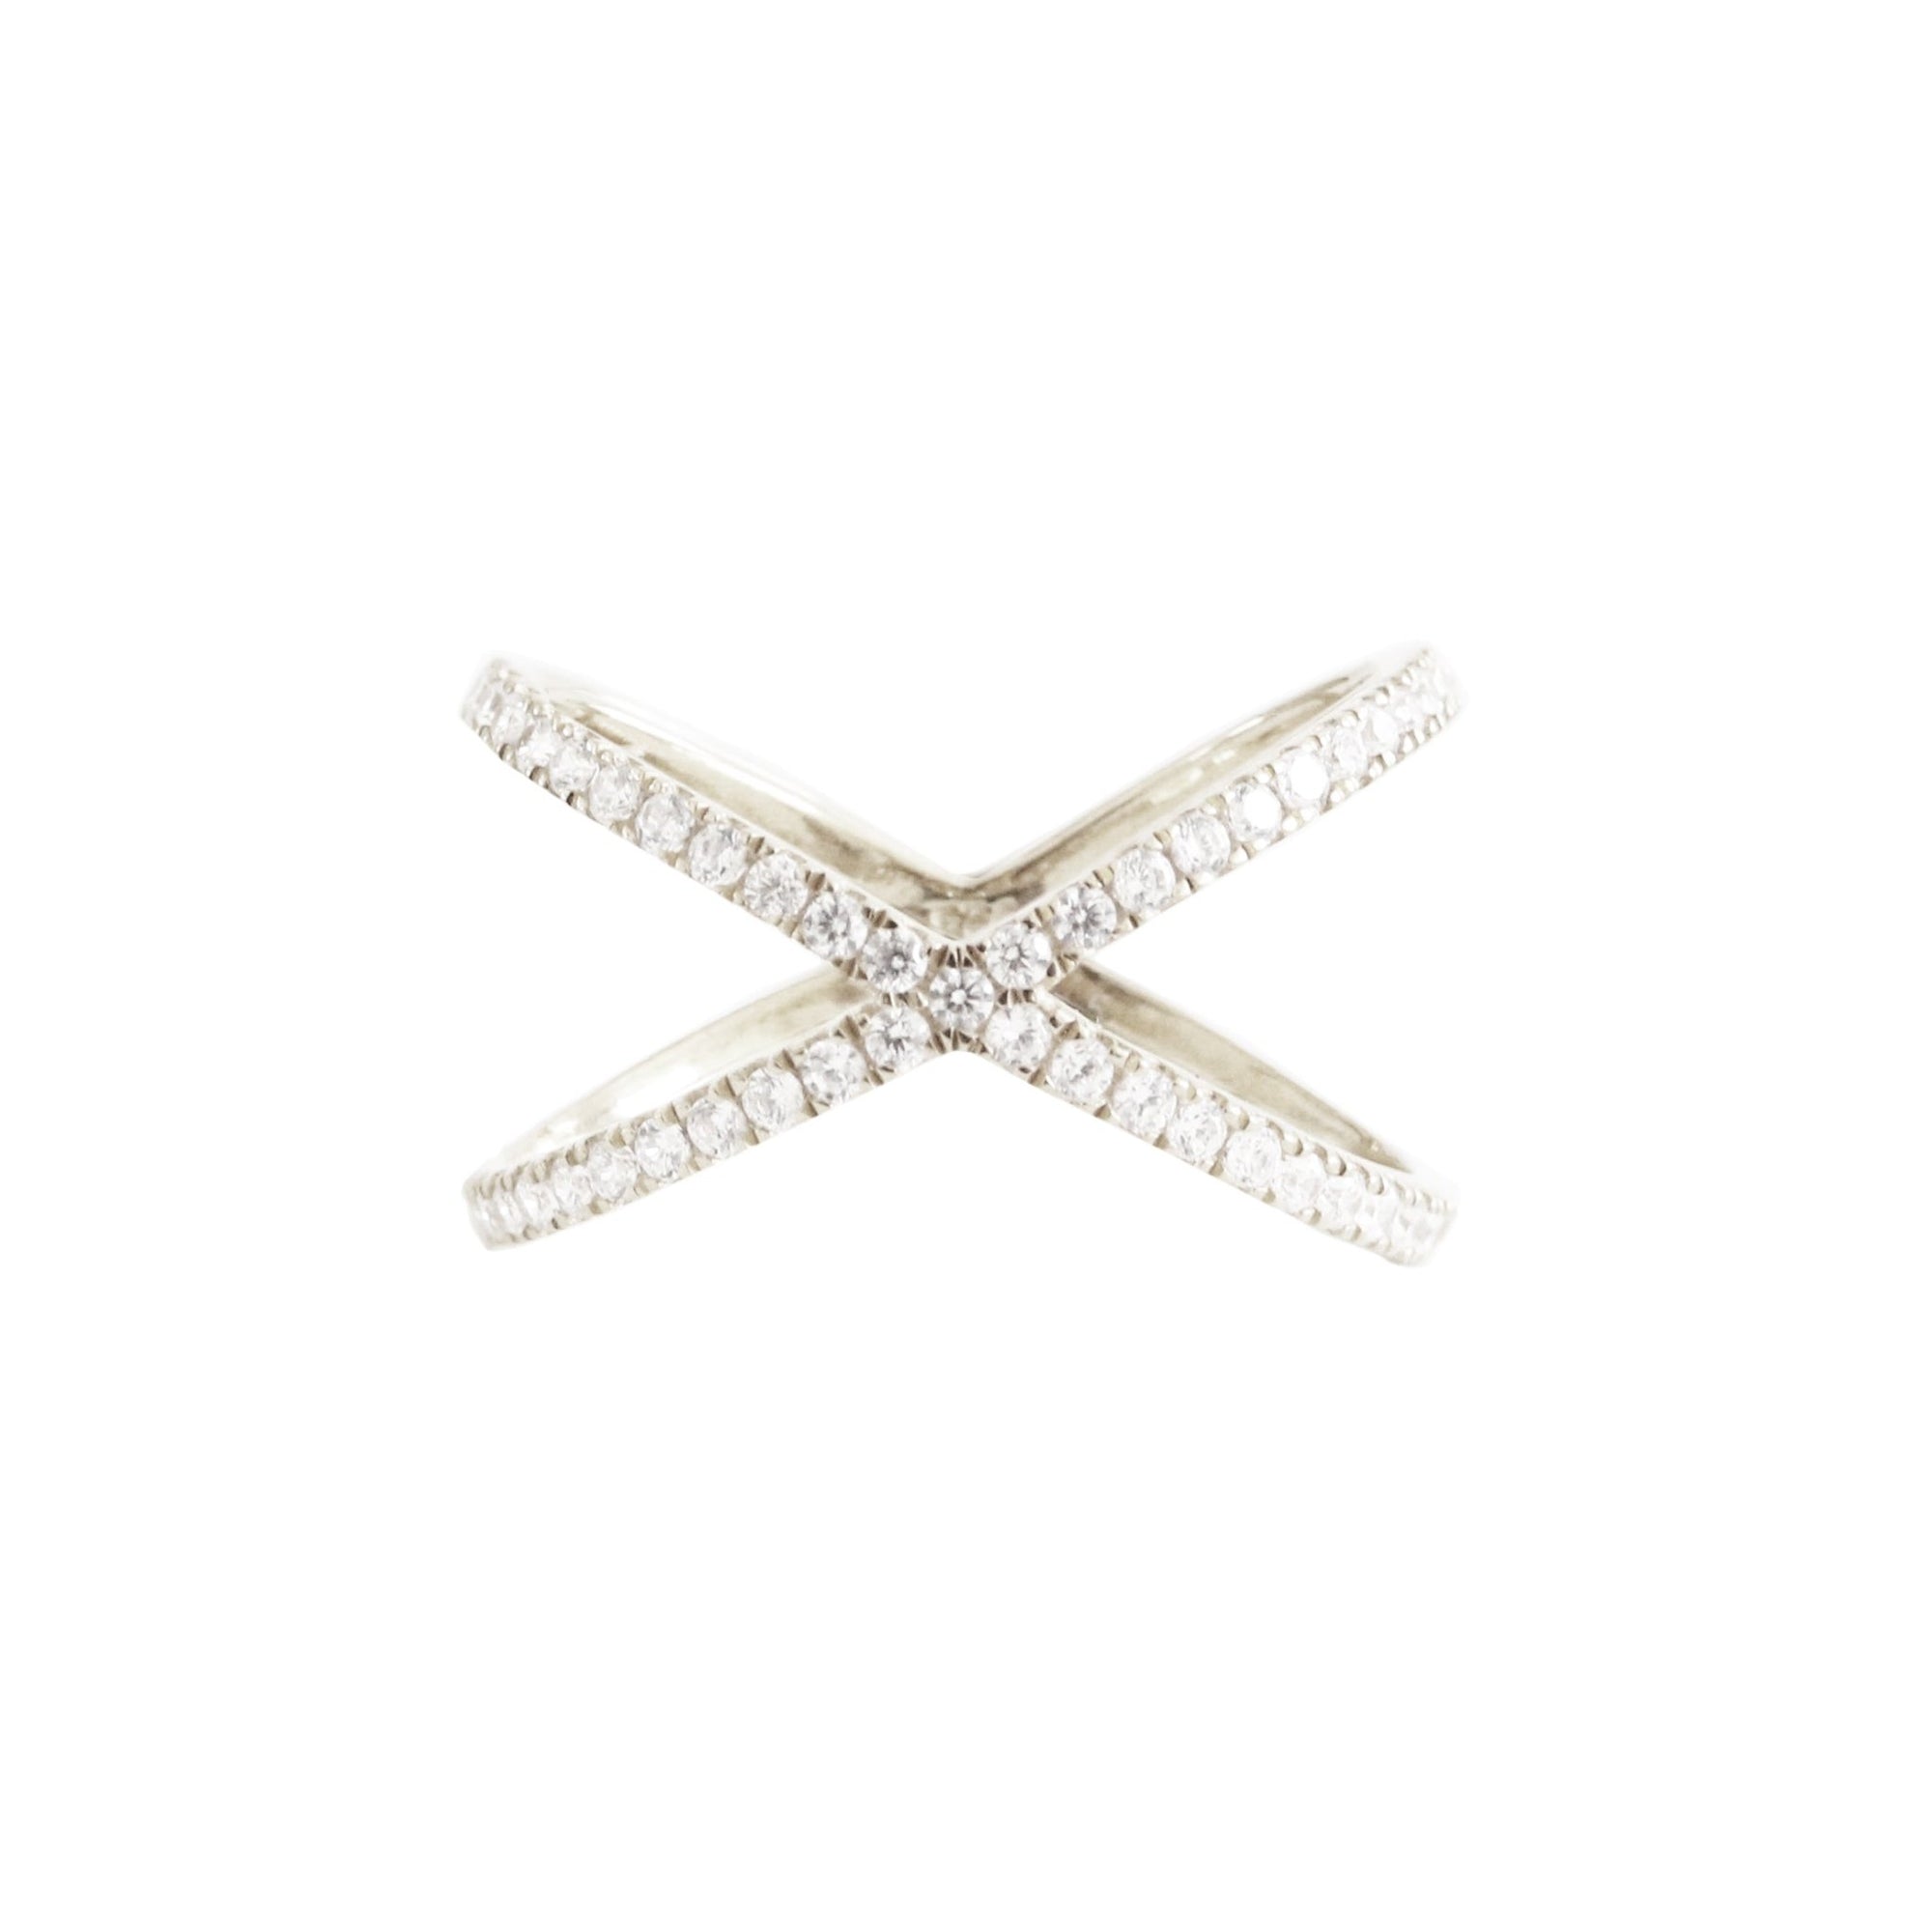 STAR CROSSED LOVE BAR RING - CUBIC ZIRCONIA & SILVER - SO PRETTY CARA COTTER